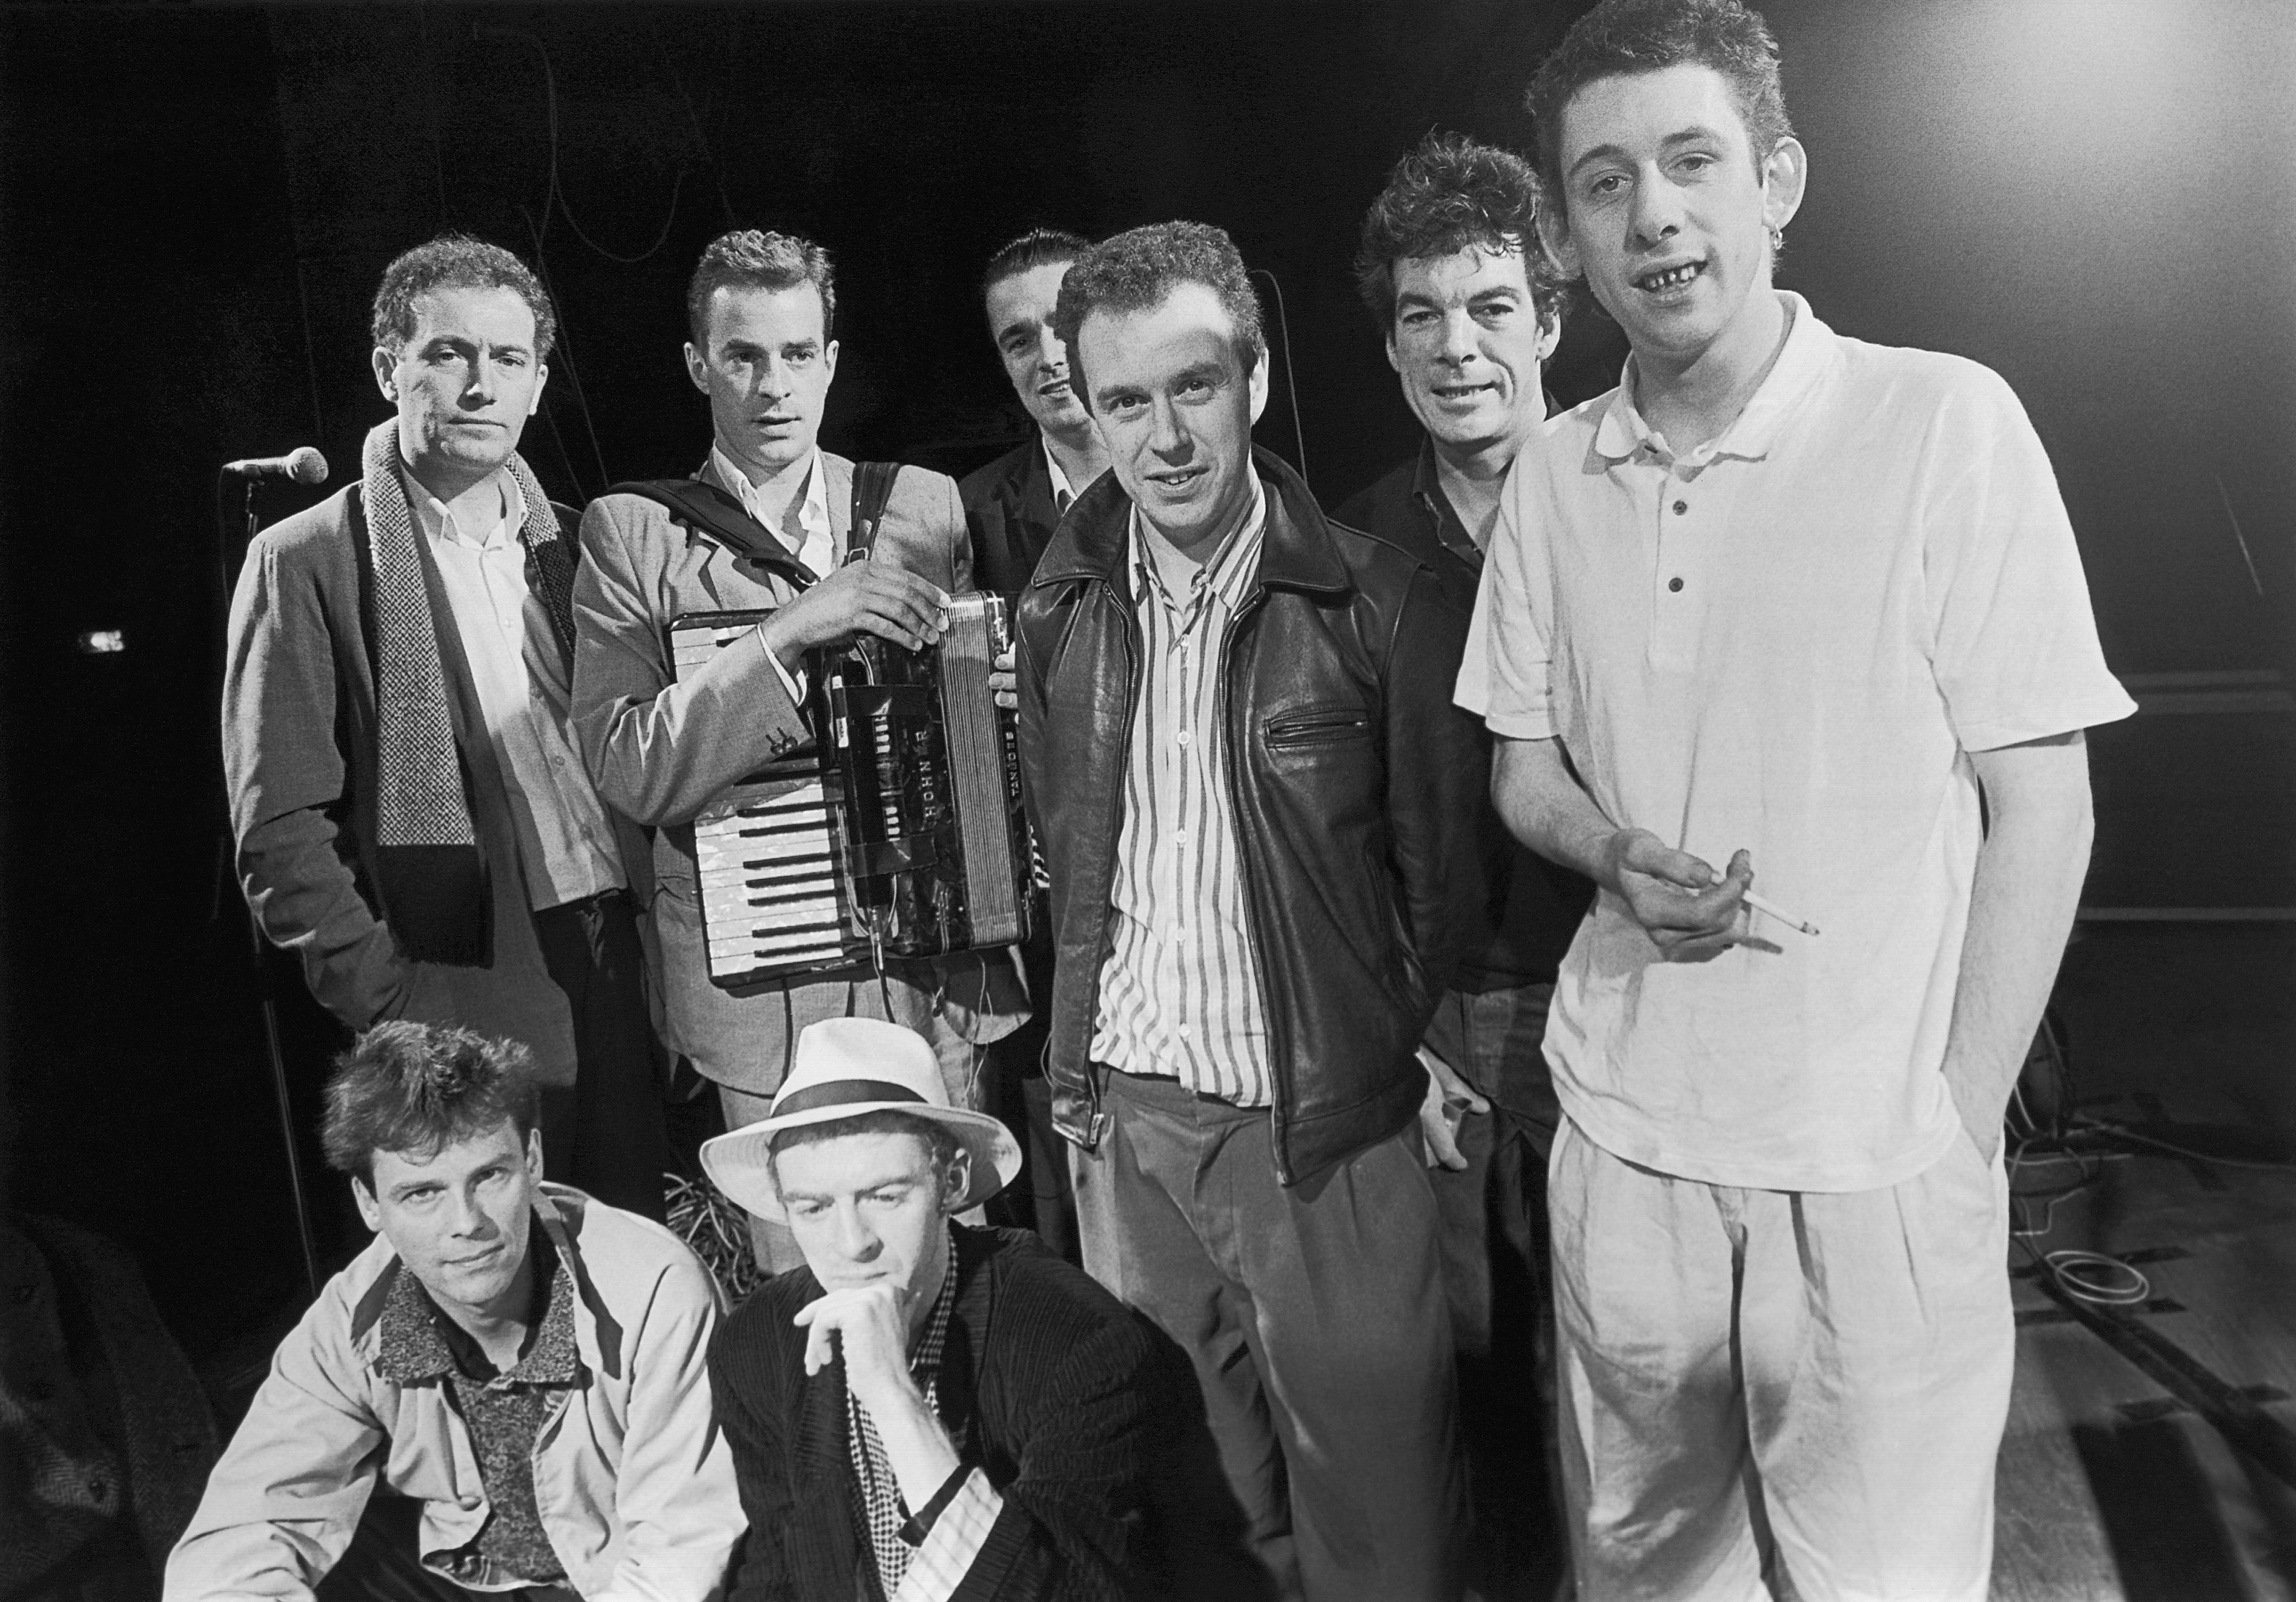 The Pogues.  The pogues, Celtic music, Black and white pictures